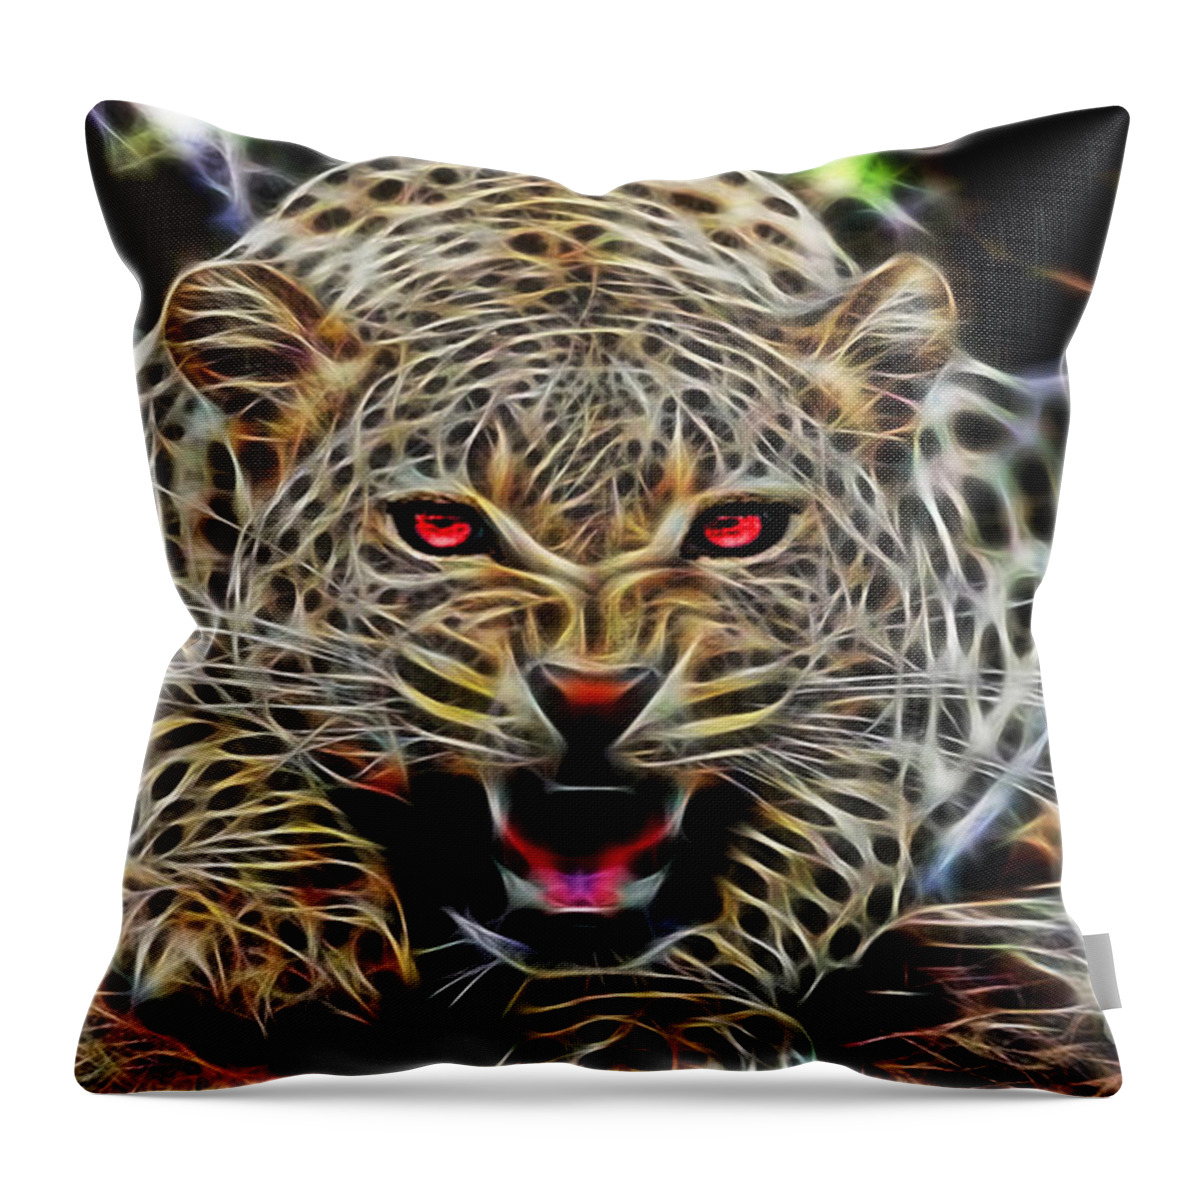 Leopard Throw Pillow featuring the mixed media Electric Leopard Wall Art Collection by Marvin Blaine